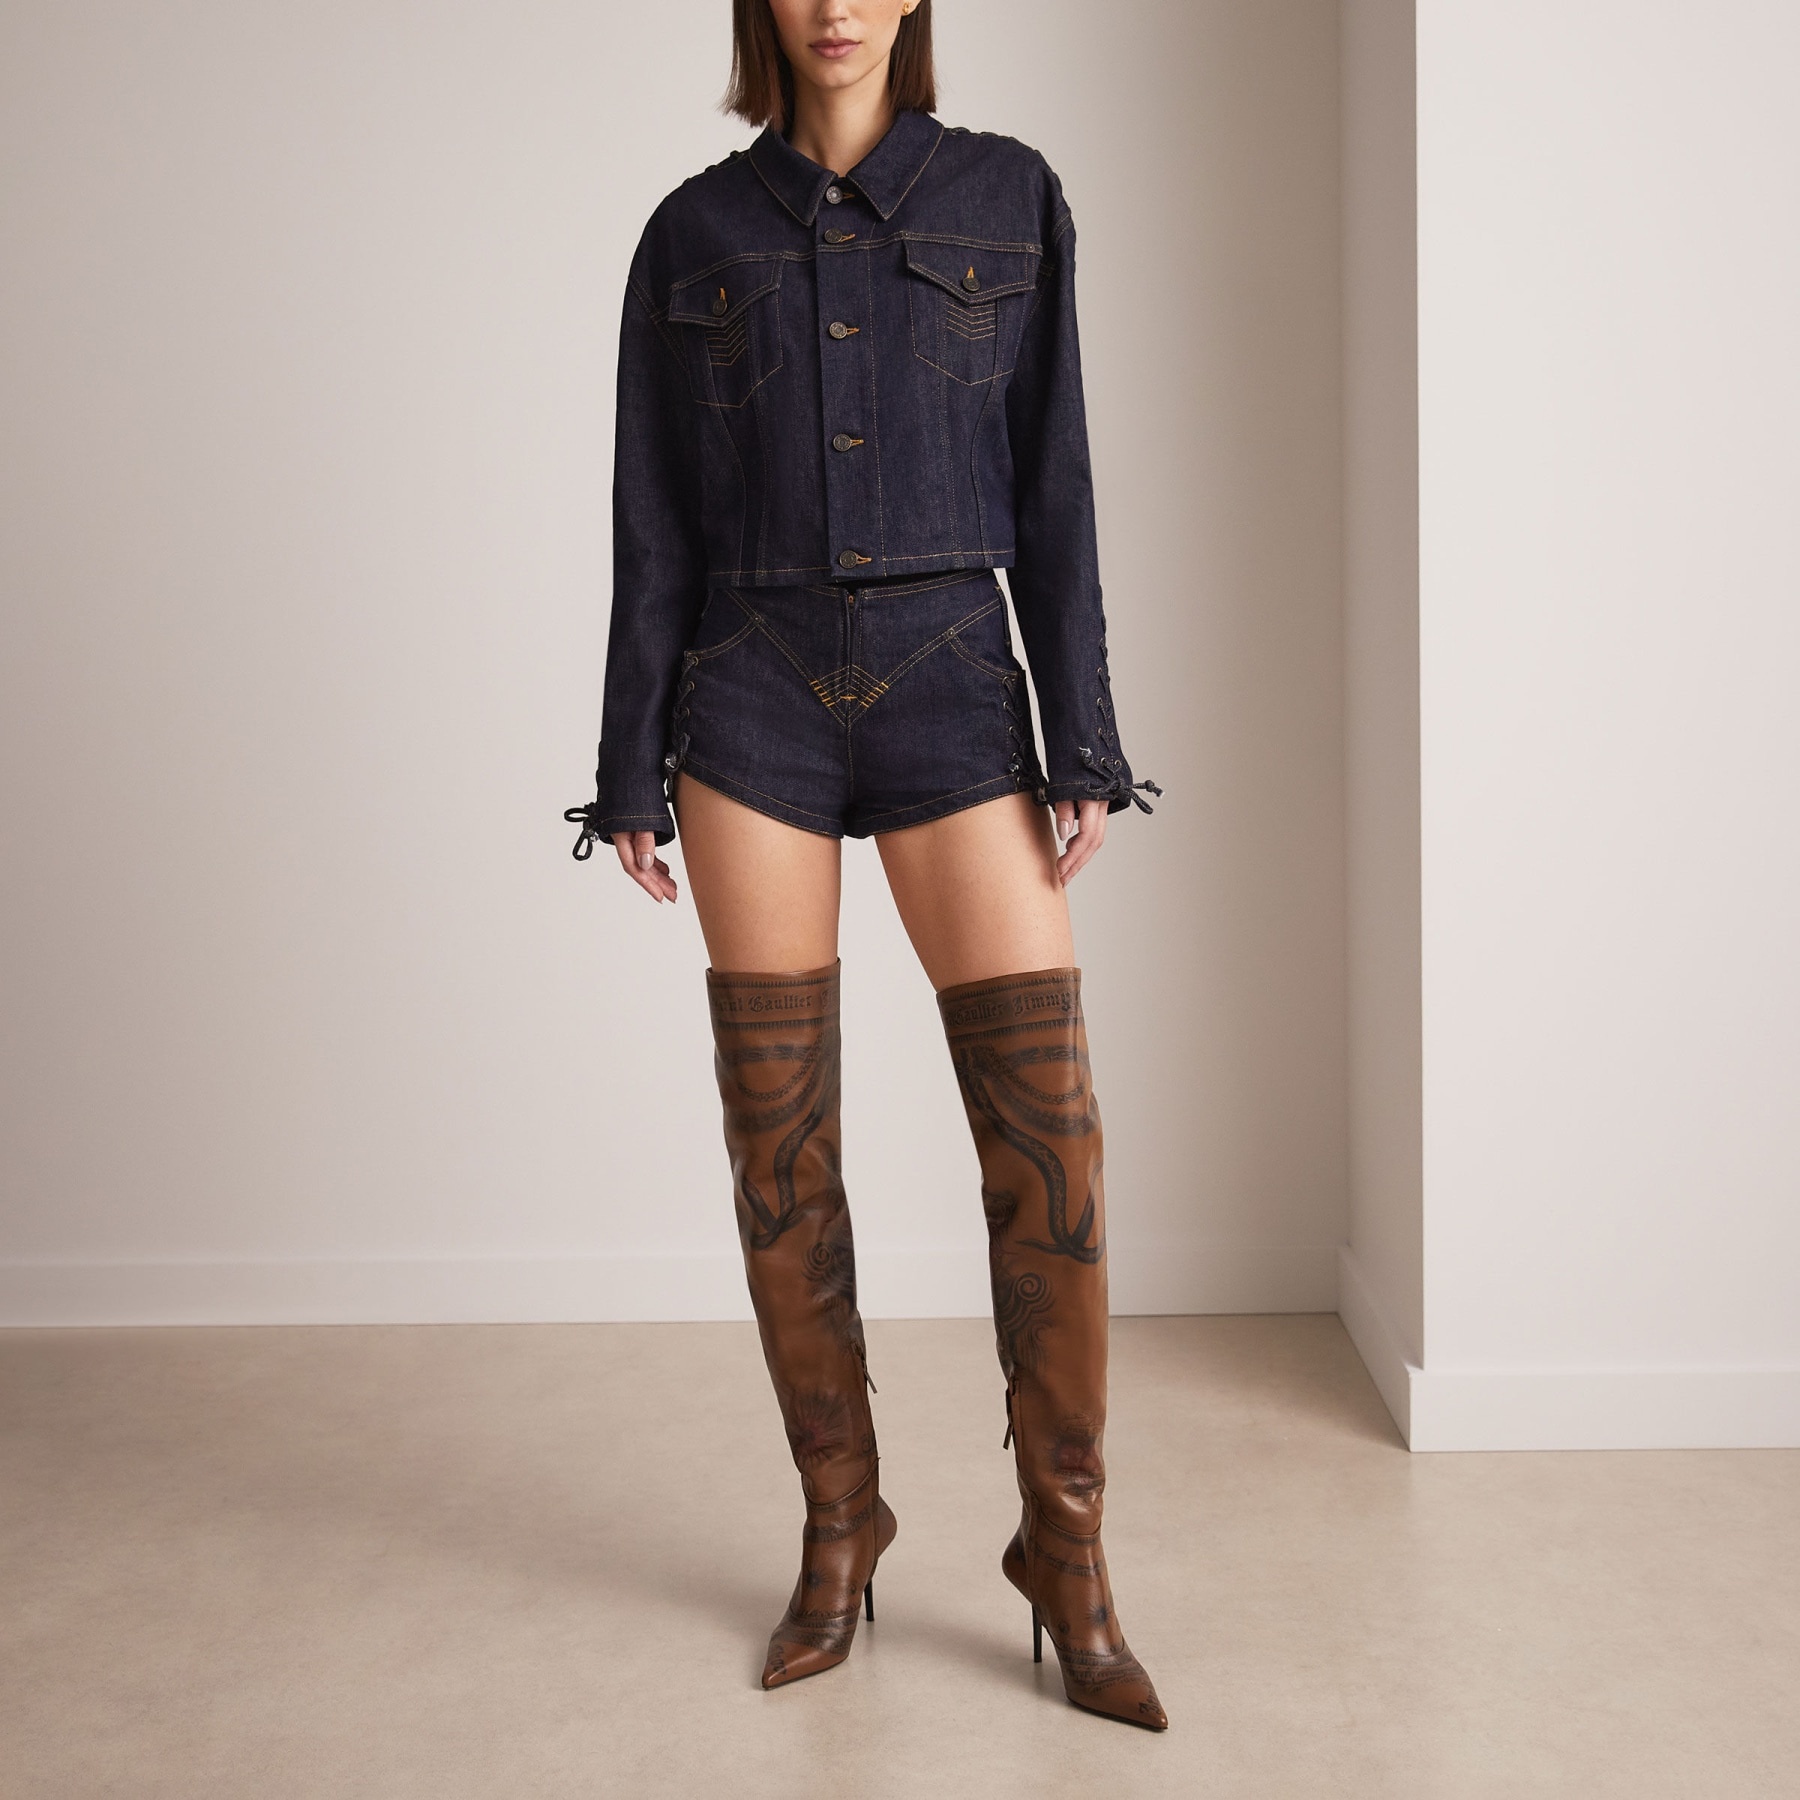 Jimmy Choo / Jean Paul Gaultier Over The Knee Boot 90
Clove Tattoo Printed Leather Over-The-Knee Boo - 2